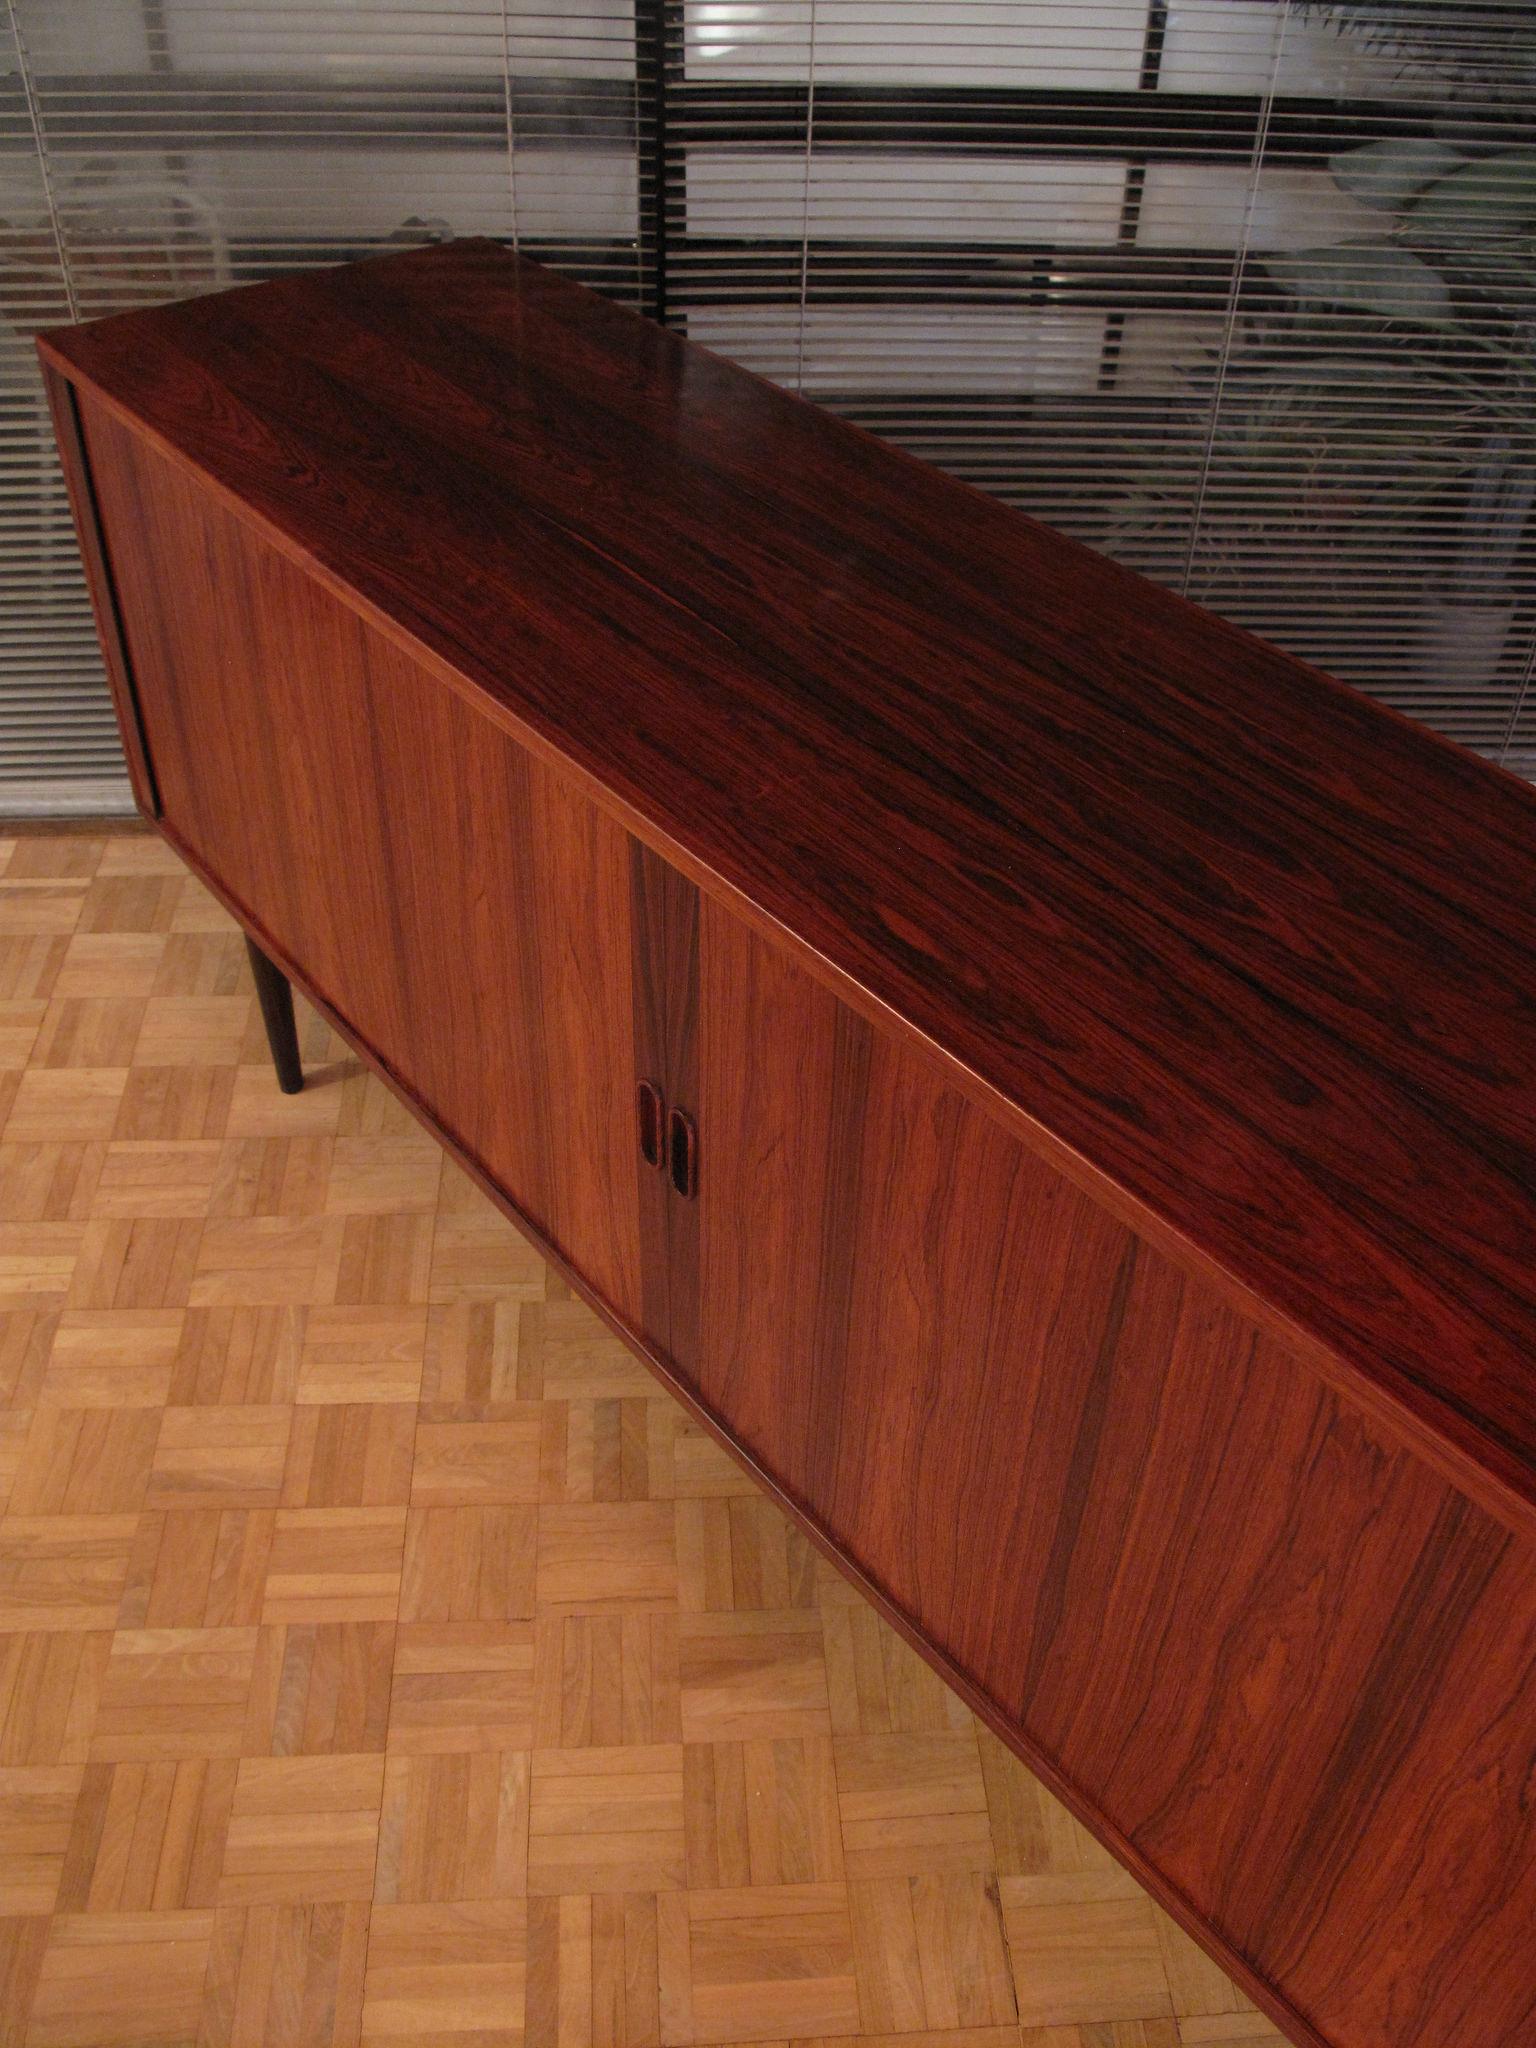 Stunning rosewood tambour door sideboard designed by Arne Vodder in the late 1950s.

A seldom seen Model 37, this design has very pleasing dimensions being not too long and standing quite low meaning it can be accommodated into most situations. It